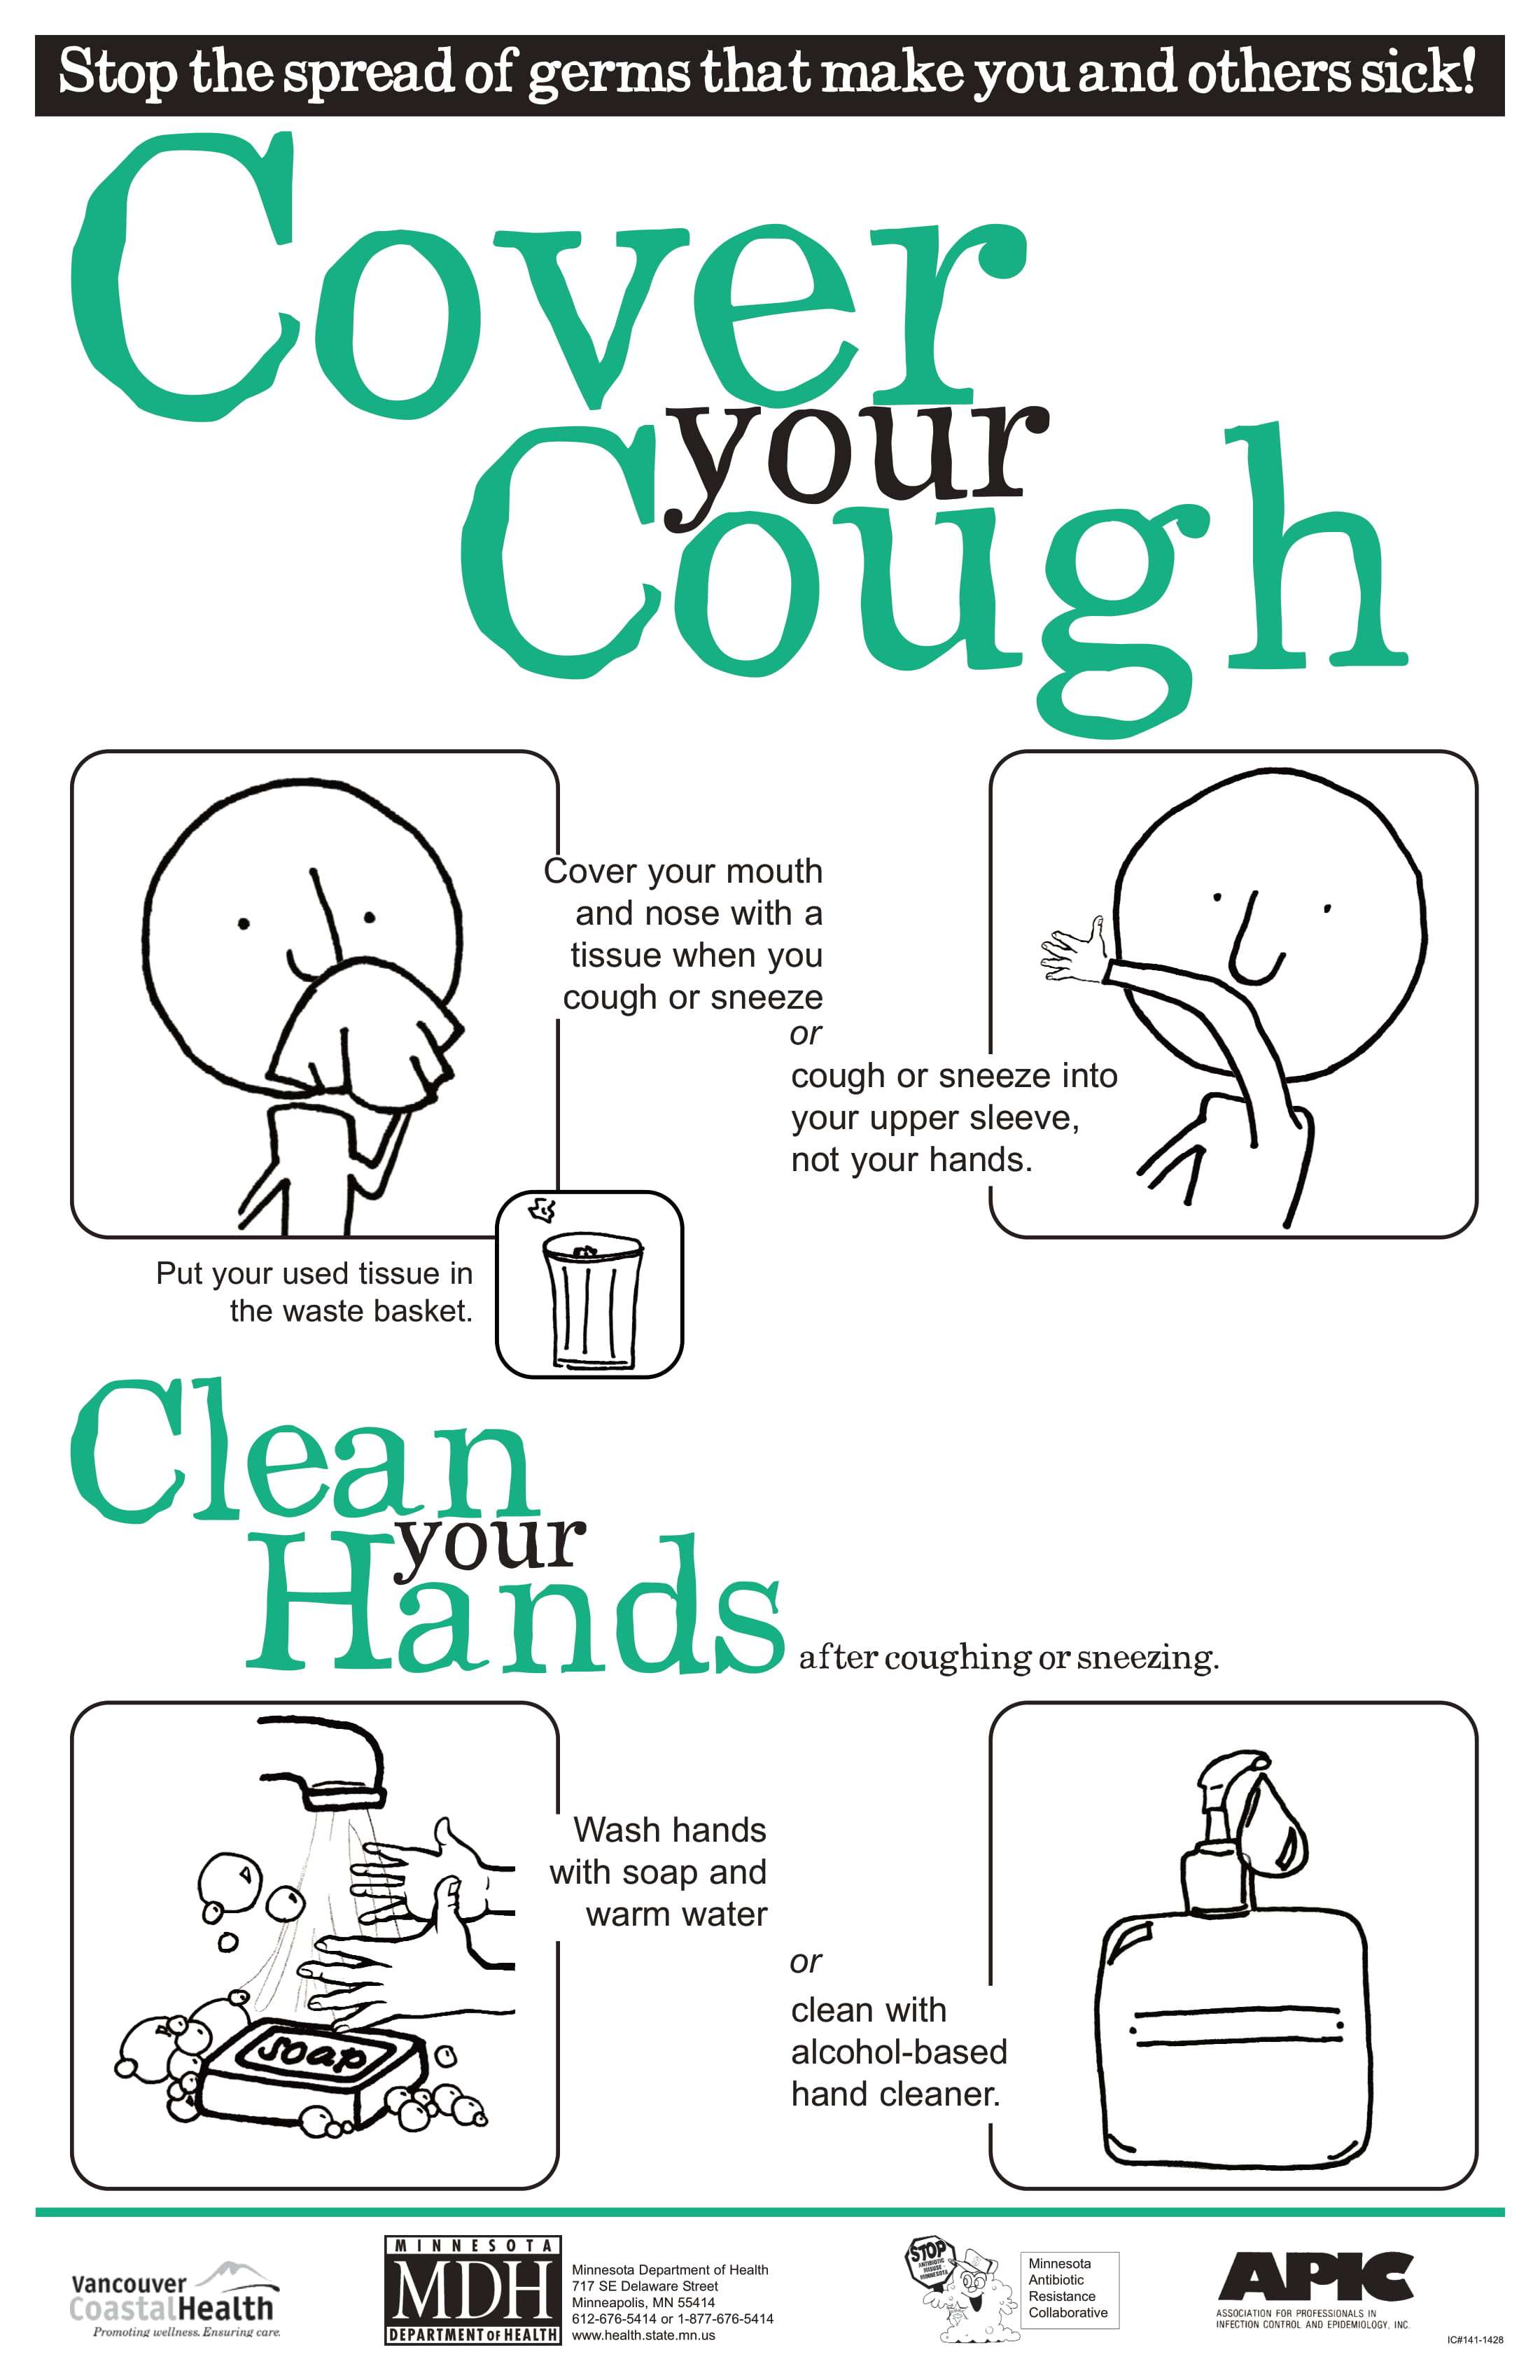 COVID_-_19/Cover_Your_Cough-1.jpg